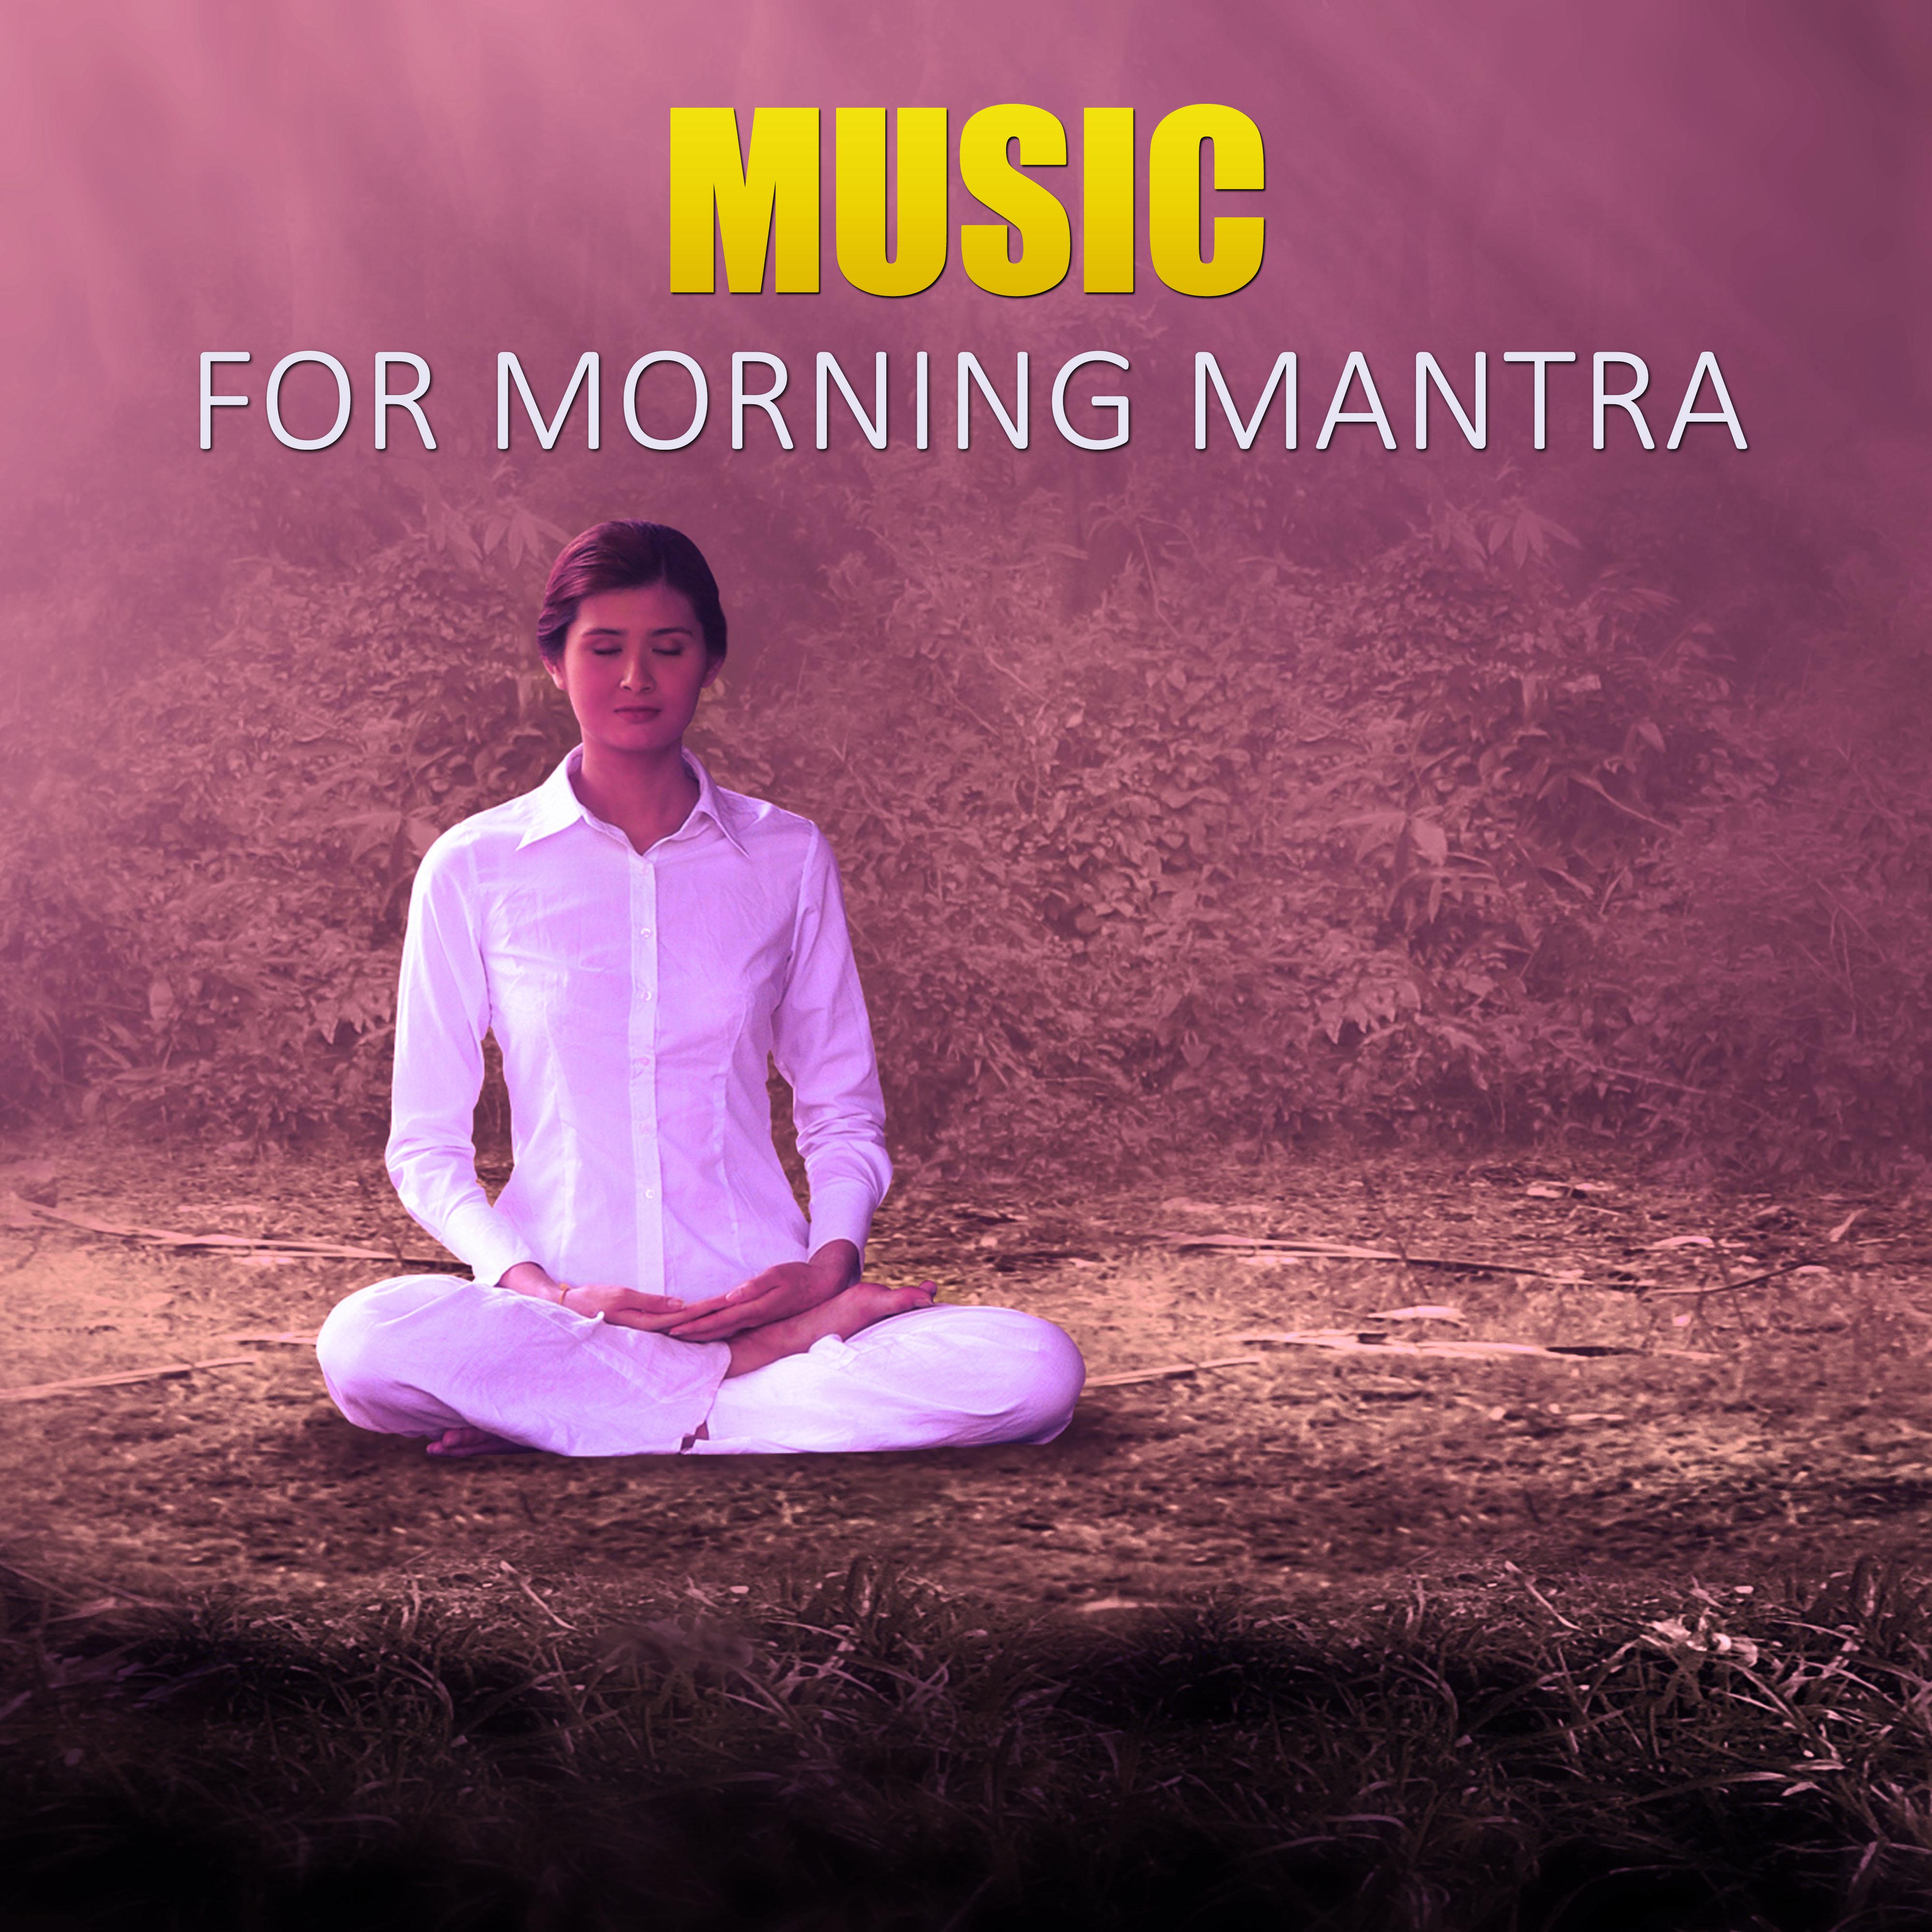 Music for Morning Mantra – Keep Your Spirit Clean, Early Meditation, Natural Sleep Aids, Rain Sounds, White Noise for Deep Sleep